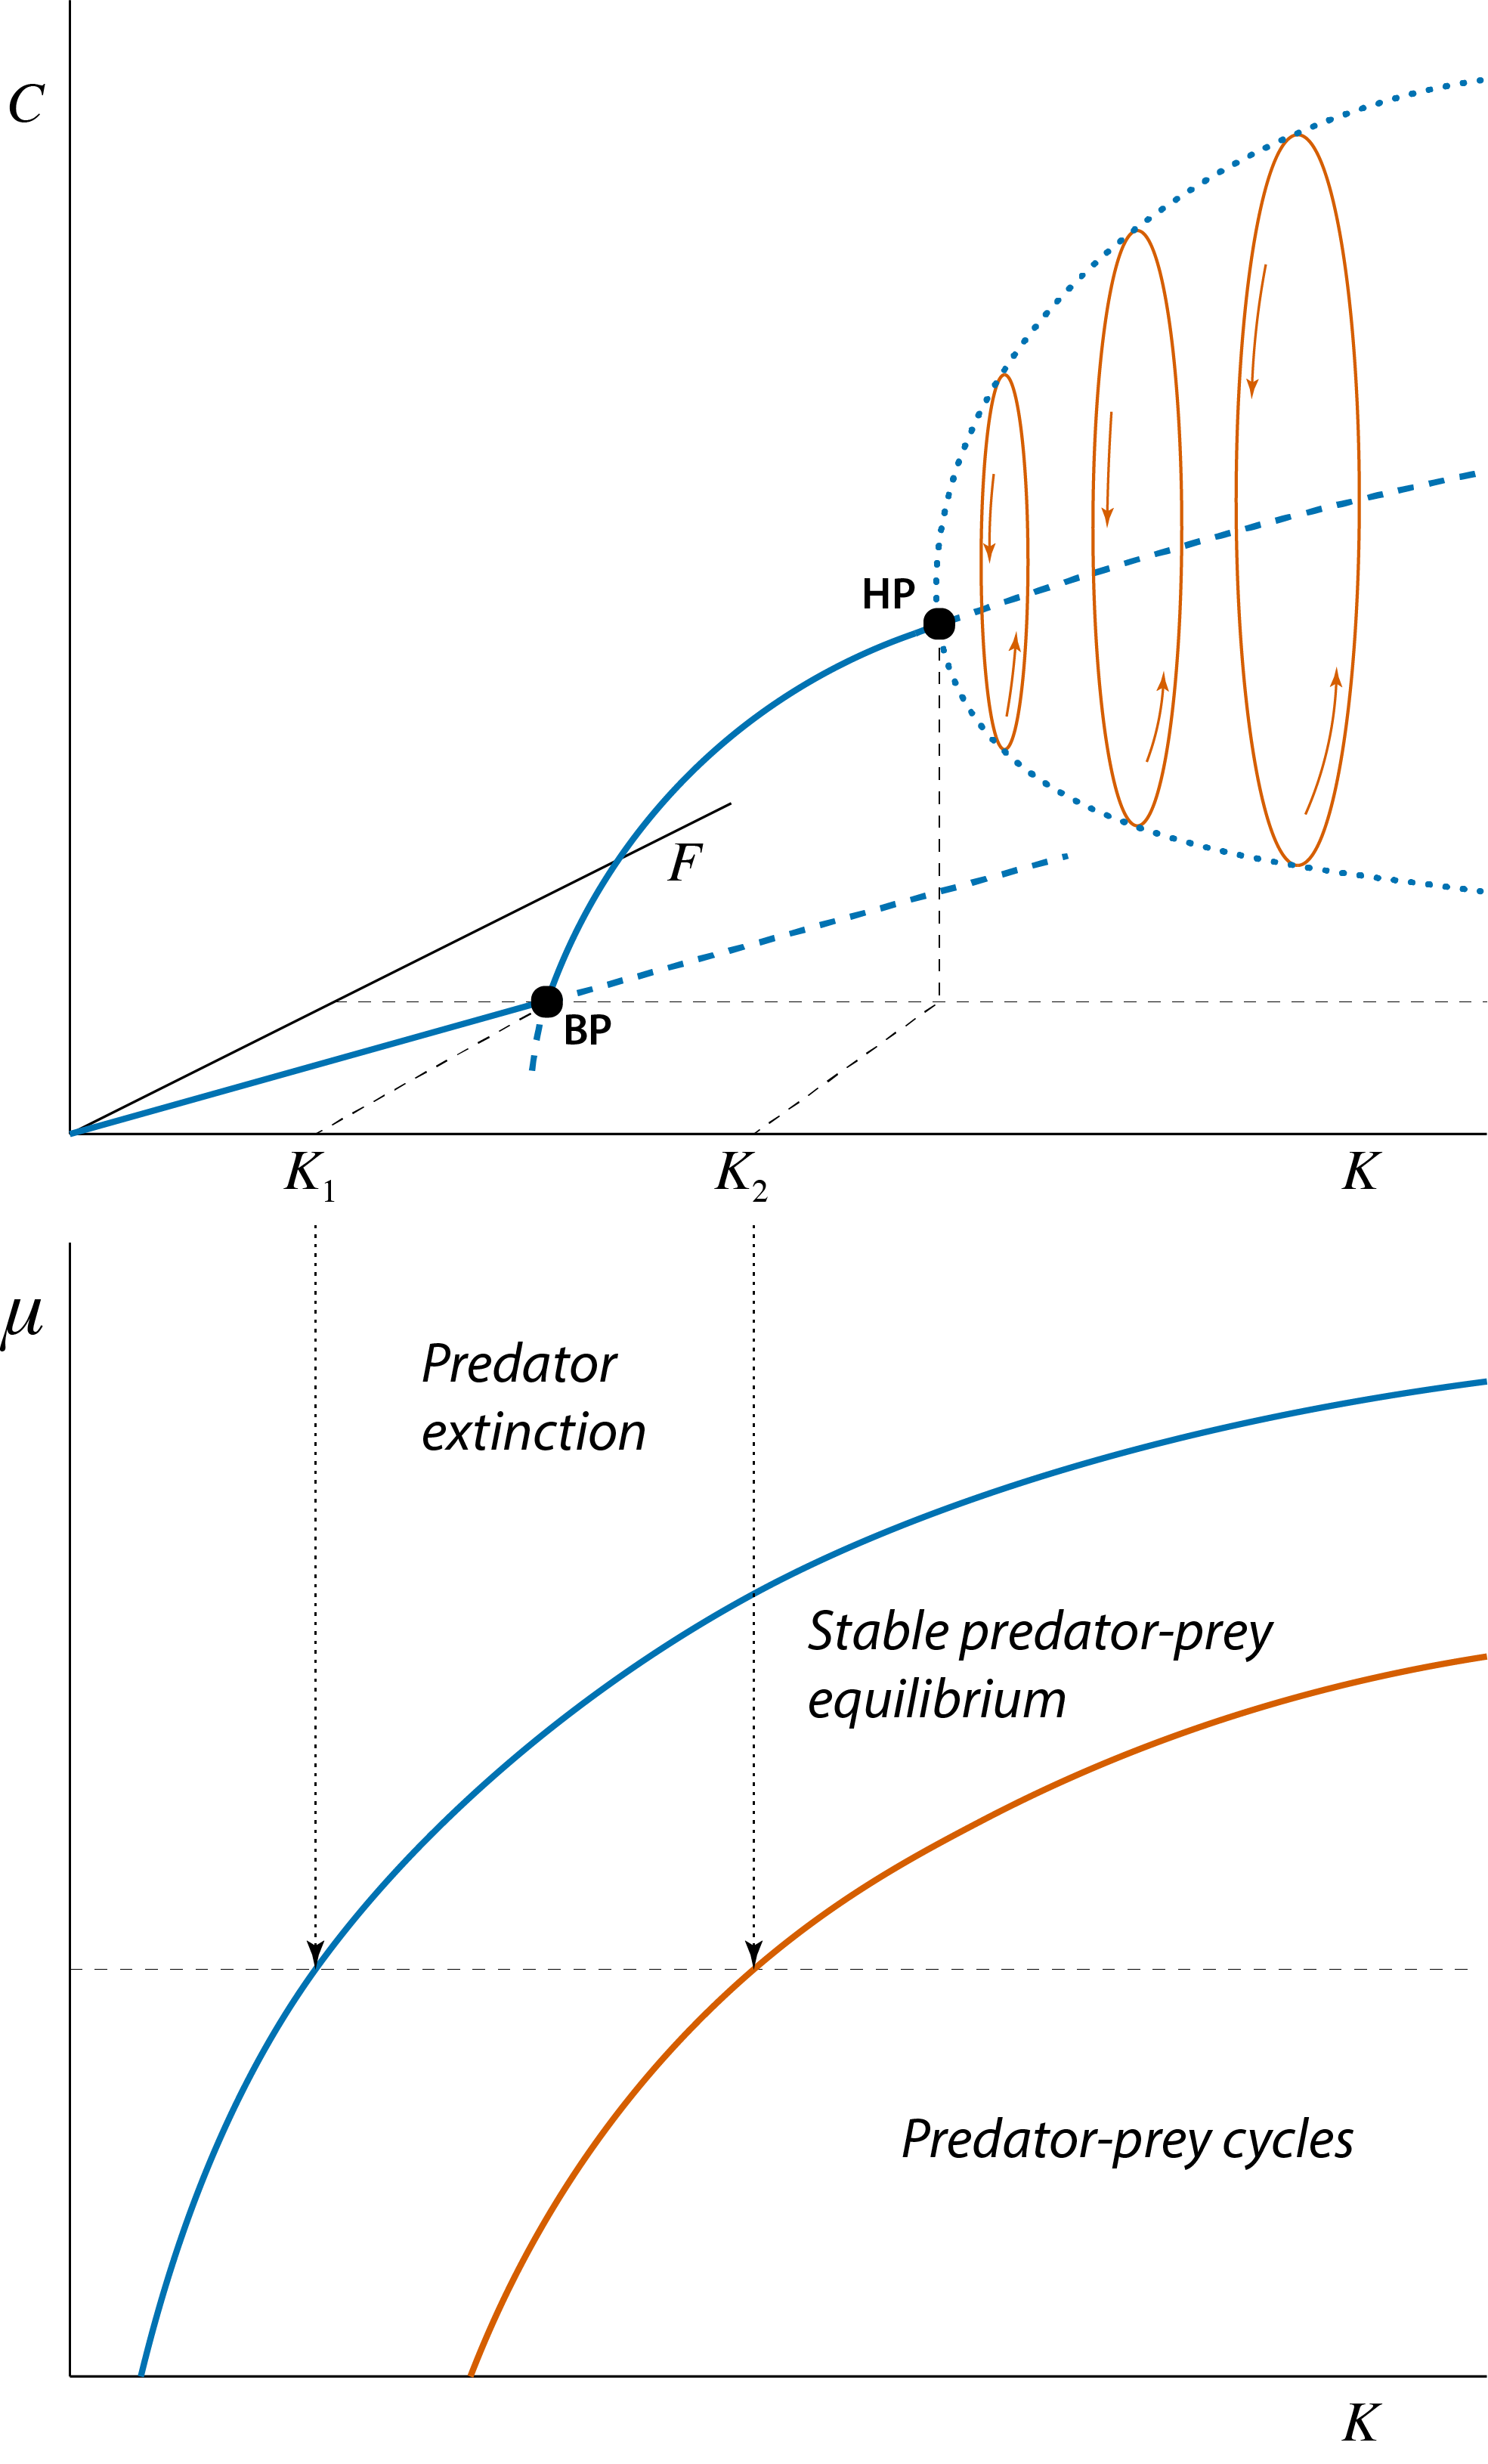 Bifurcation graph of the predator-prey model, showing the steady state values of prey $\tilde{F}$ and predator $\tilde{C}$ as a function of the model parameter $K$ representing the prey carrying capacity. Curve sections representing unstable steady states are indicated with dashed lines, curve sections representing stable steady states are indicated with solid lines. The special point indicated with 'BP', occurring at $K=K_1$ is the branching point or transcritical bifurcation point, above which predators can persist. The special point indicated with 'HP' occurring at $K=K_2$ is the Hopf bifurcation point at which the predator-prey equilibrium changes form stable to unstable and a limit cycle emerges. With increasing values of $K$ these limit cycles increase in amplitude. The thick dotted line indicates the amplitude of these cycles in the predator abundance. The three ellipse-shaped closed curves illustrate this limit cycle in both prey and predator density with thin arrows inidcating the direction of rotation.